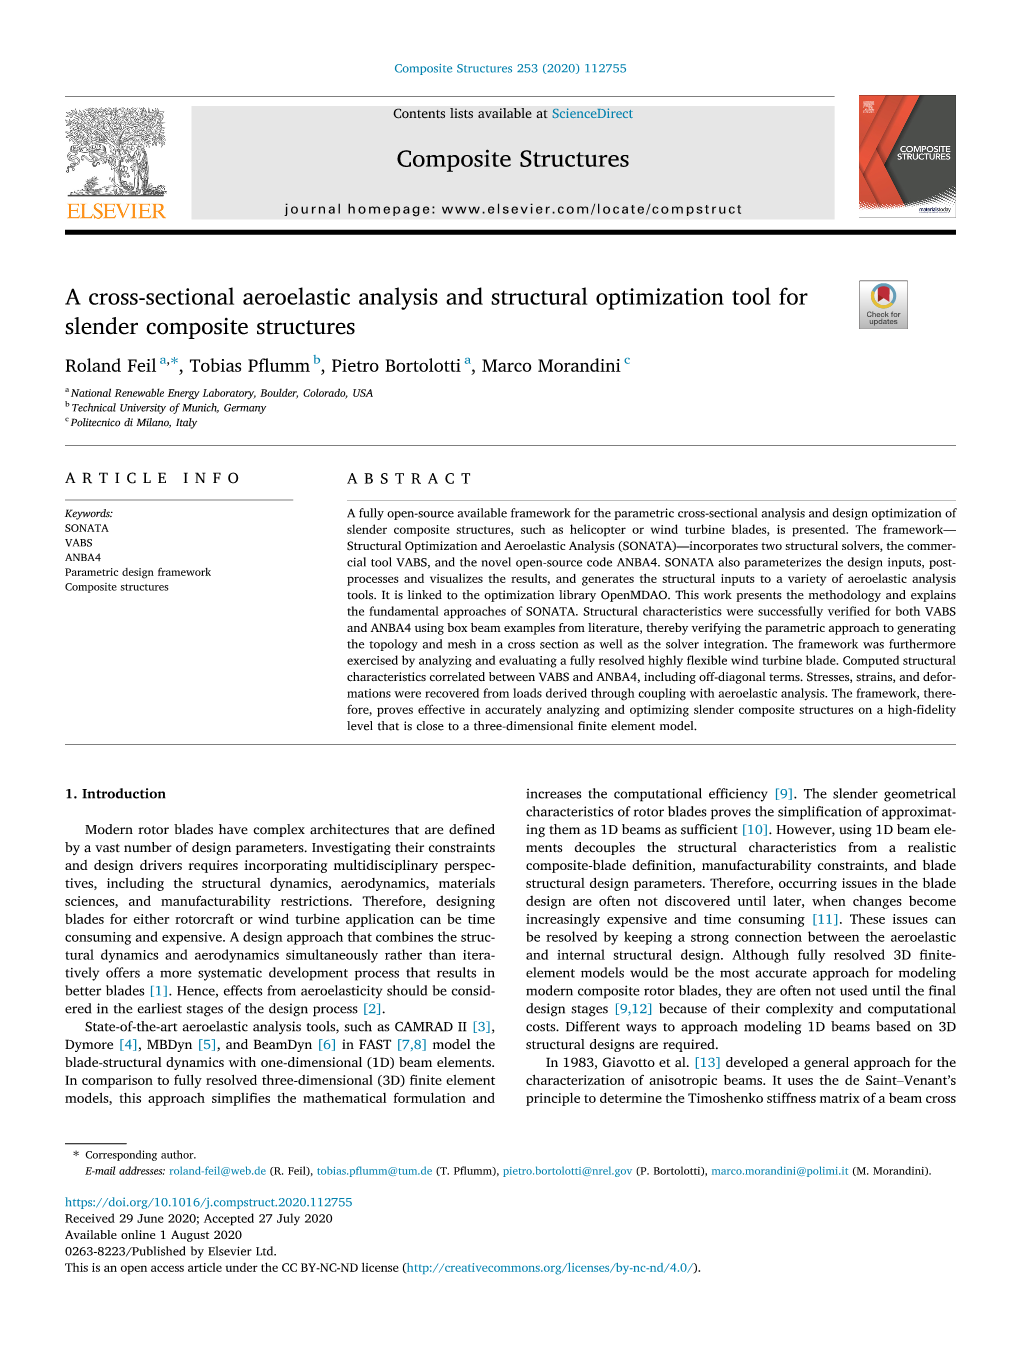 A Cross-Sectional Aeroelastic Analysis and Structural Optimization Tool For